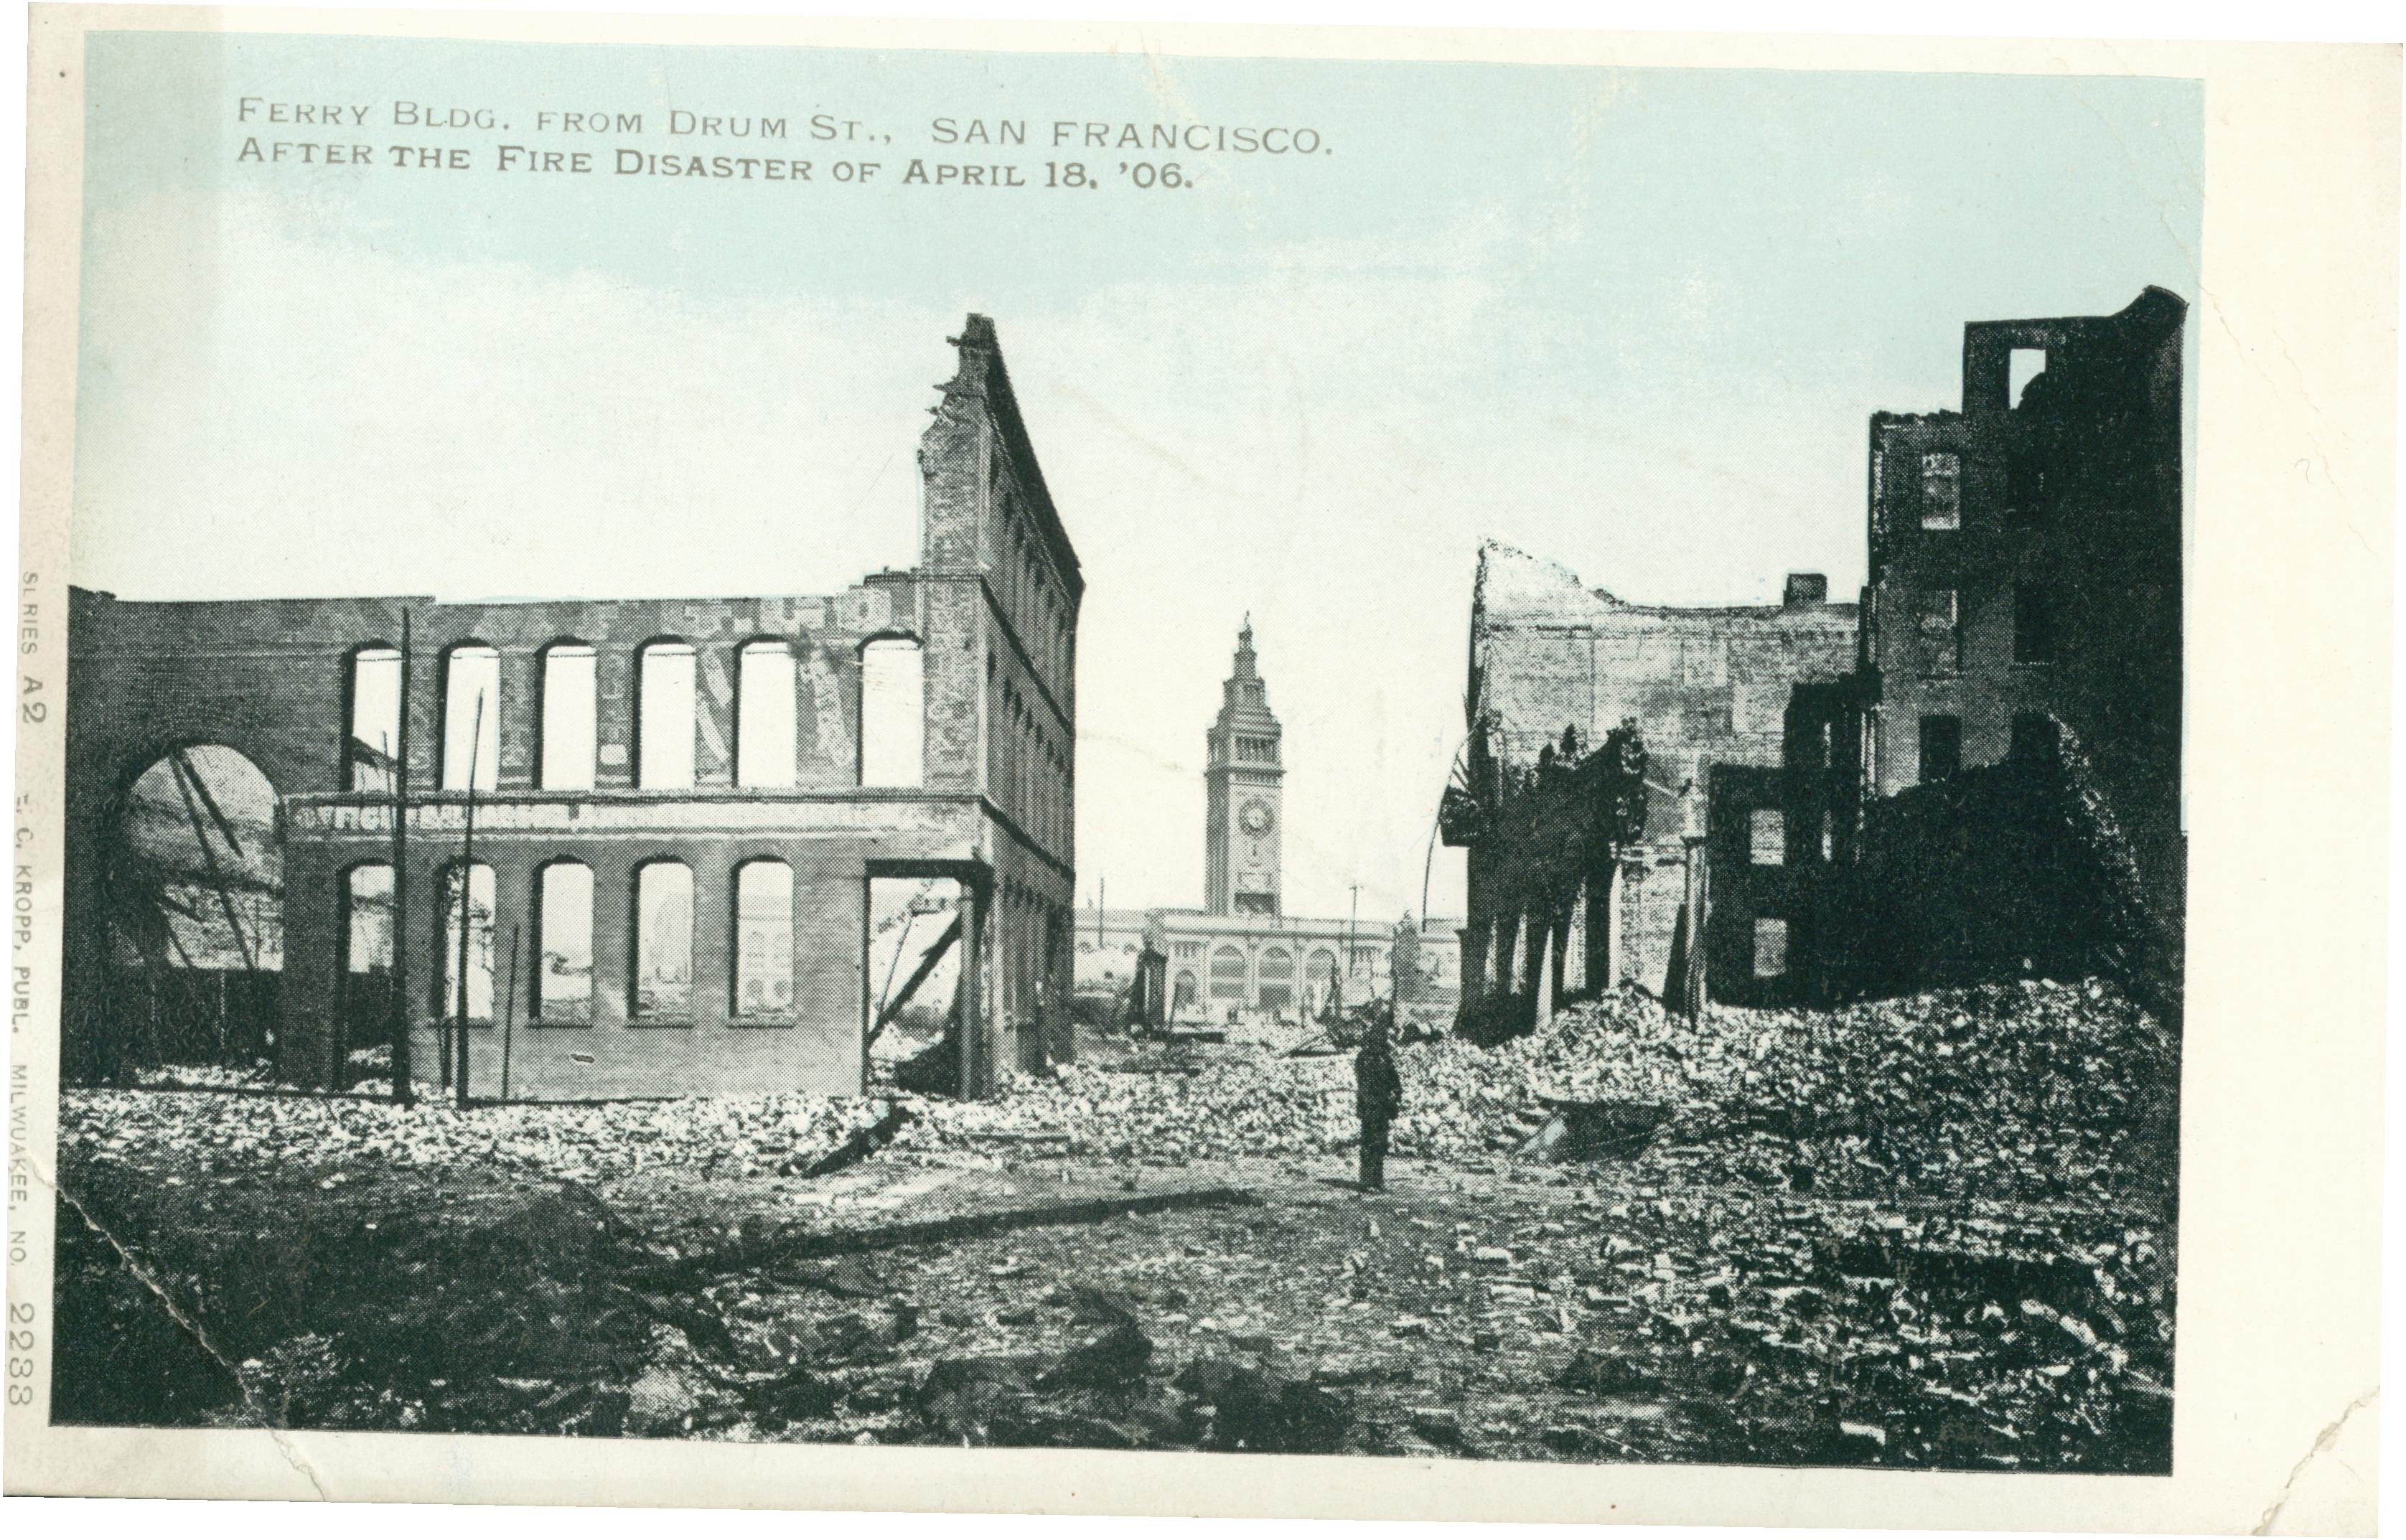 Shows  the ruins of several buildings, including the Ferry Building after the earthquake